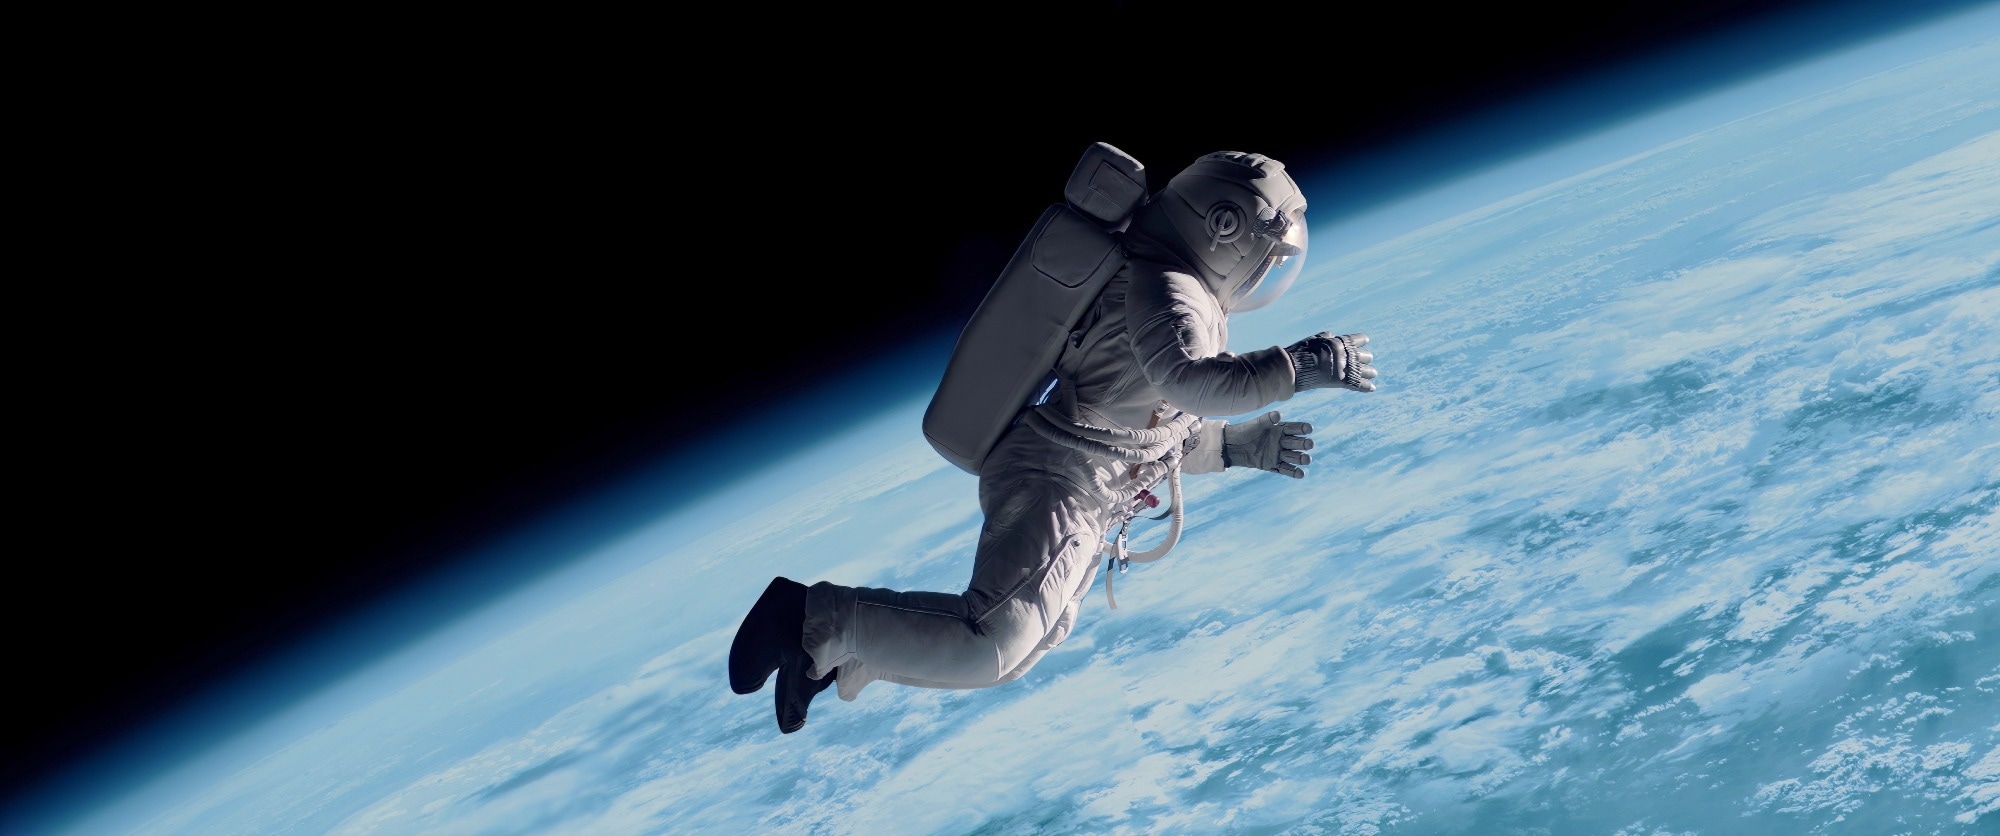 Study: The effect of space travel on human reproductive health: a systematic review. Image Credit: Supamotionstock.com/Shutterstock.com